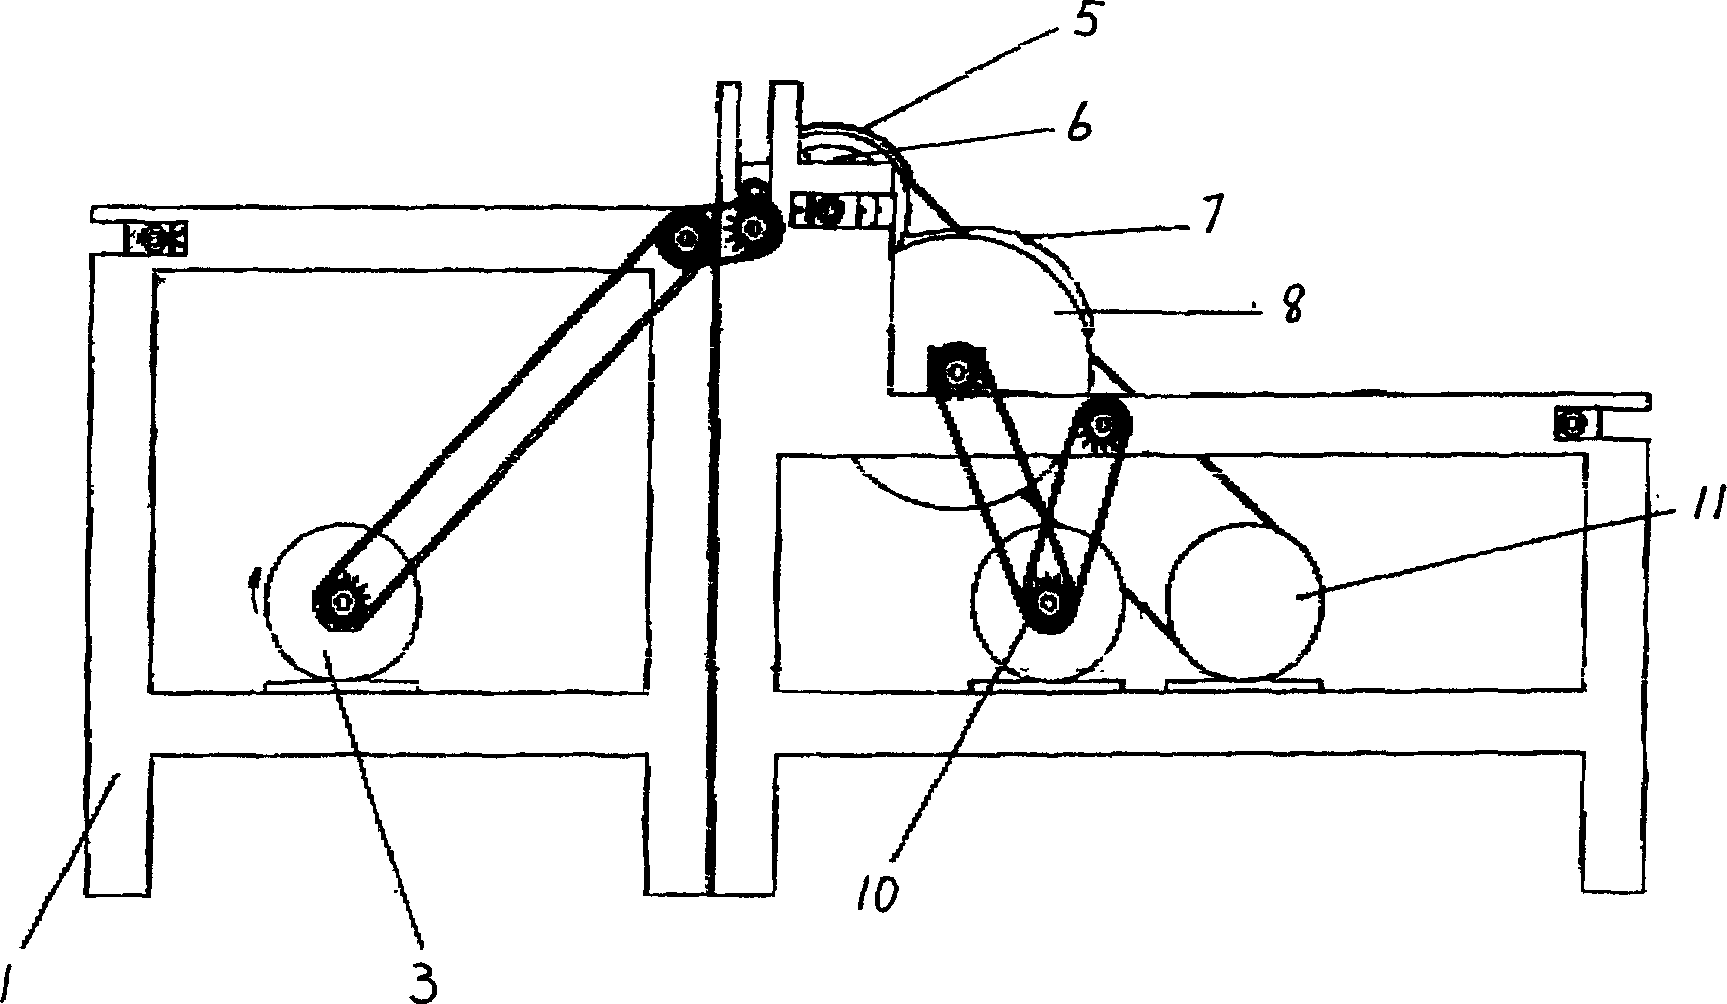 Method and equipment for extracting fiber from stalks